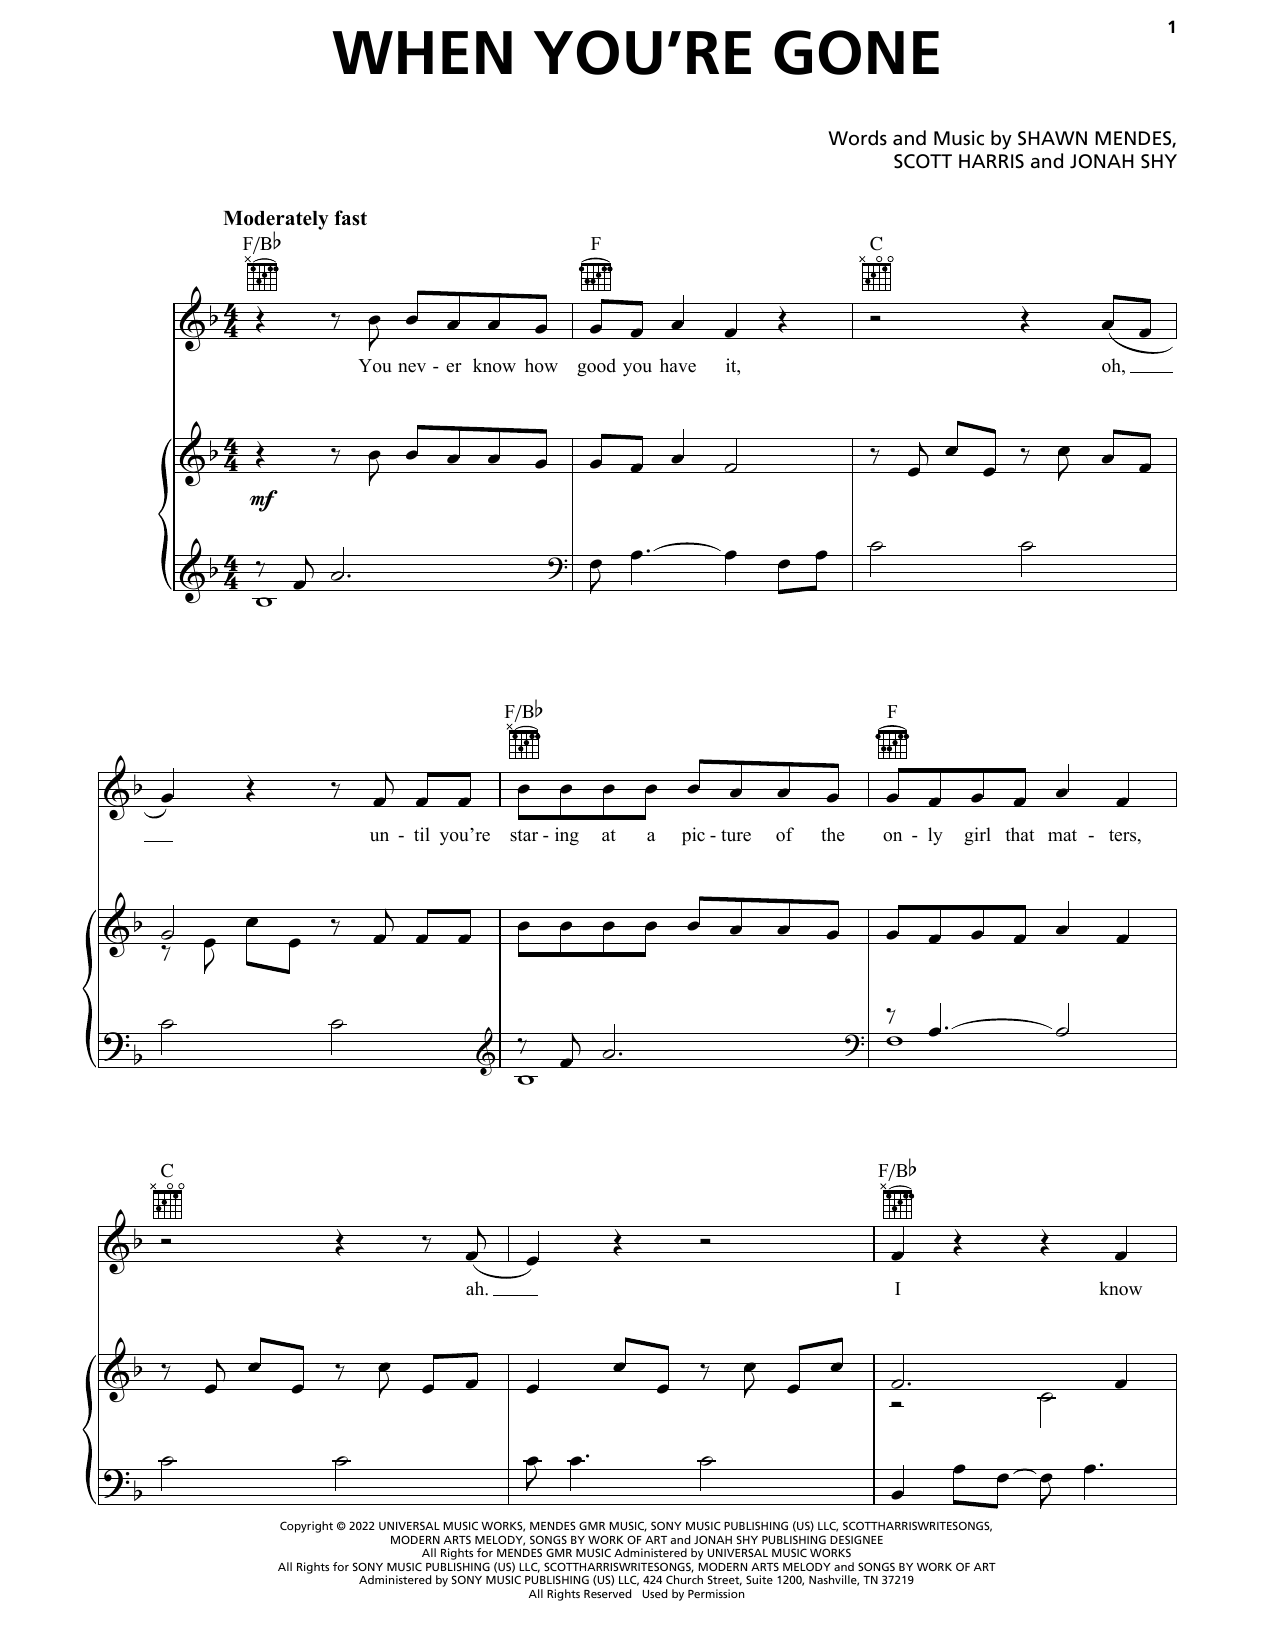 Download Shawn Mendes When You're Gone Sheet Music